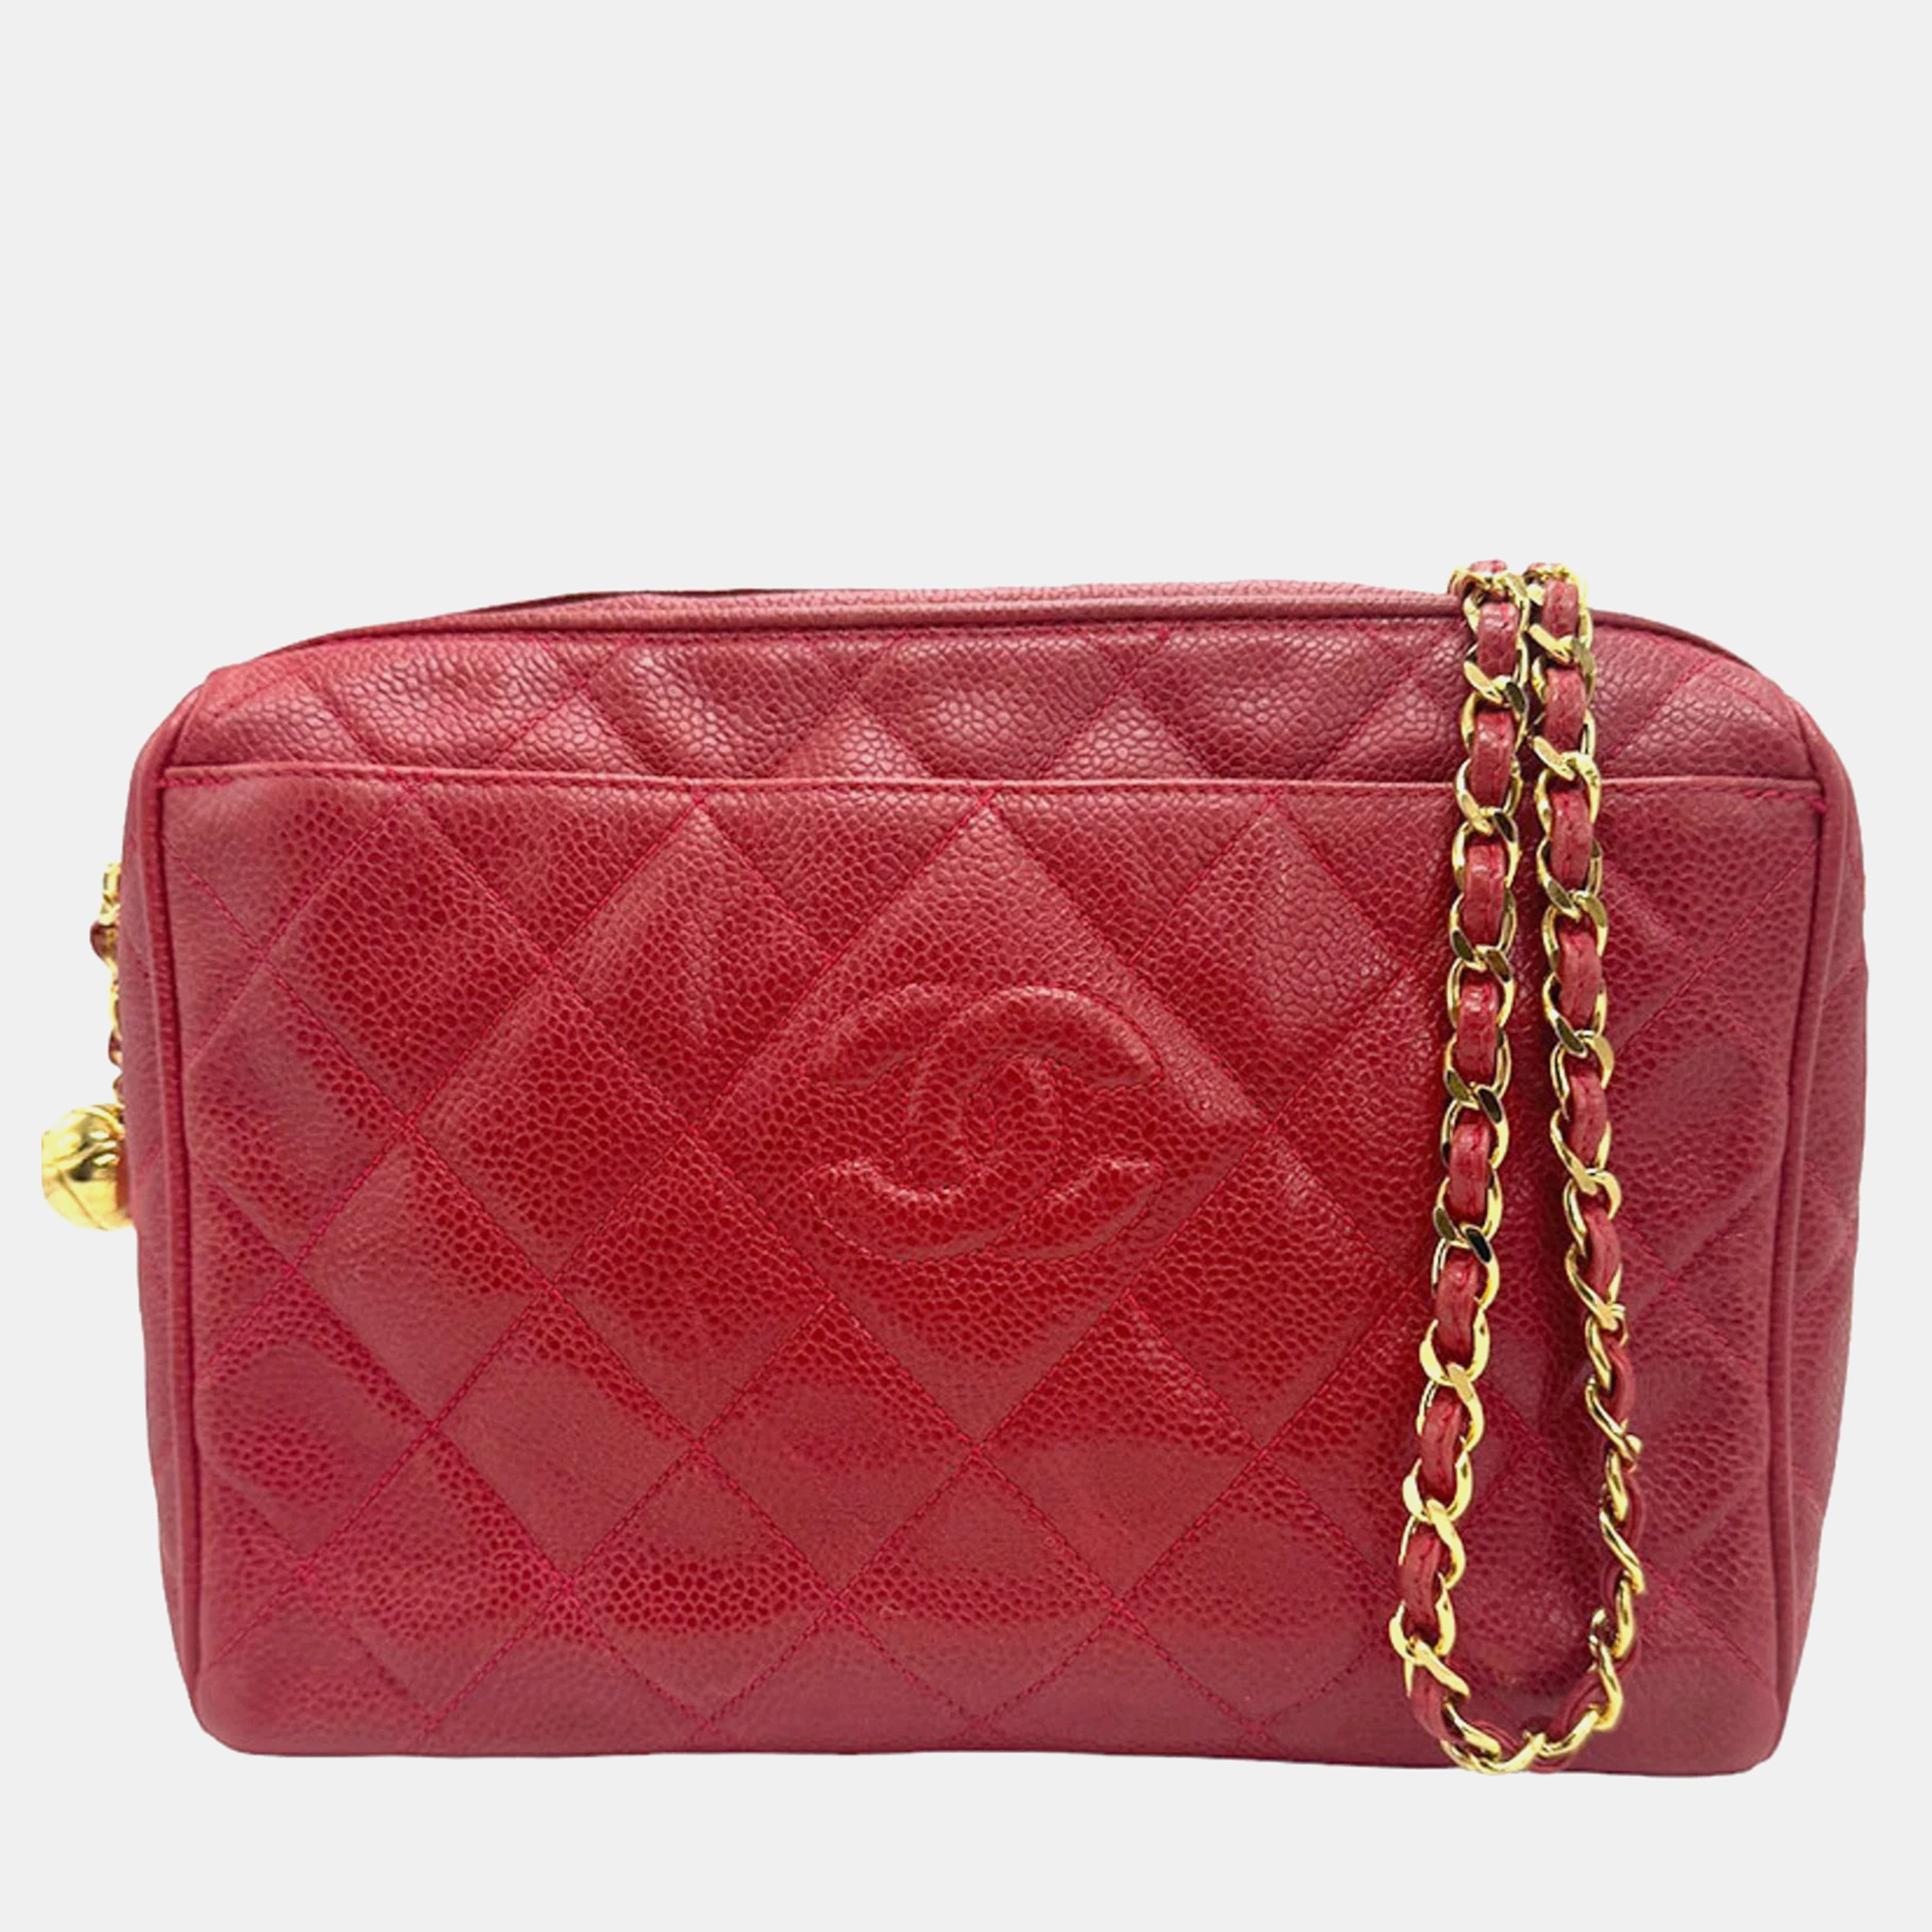 Chanel red quilted leather cc shoulder bag